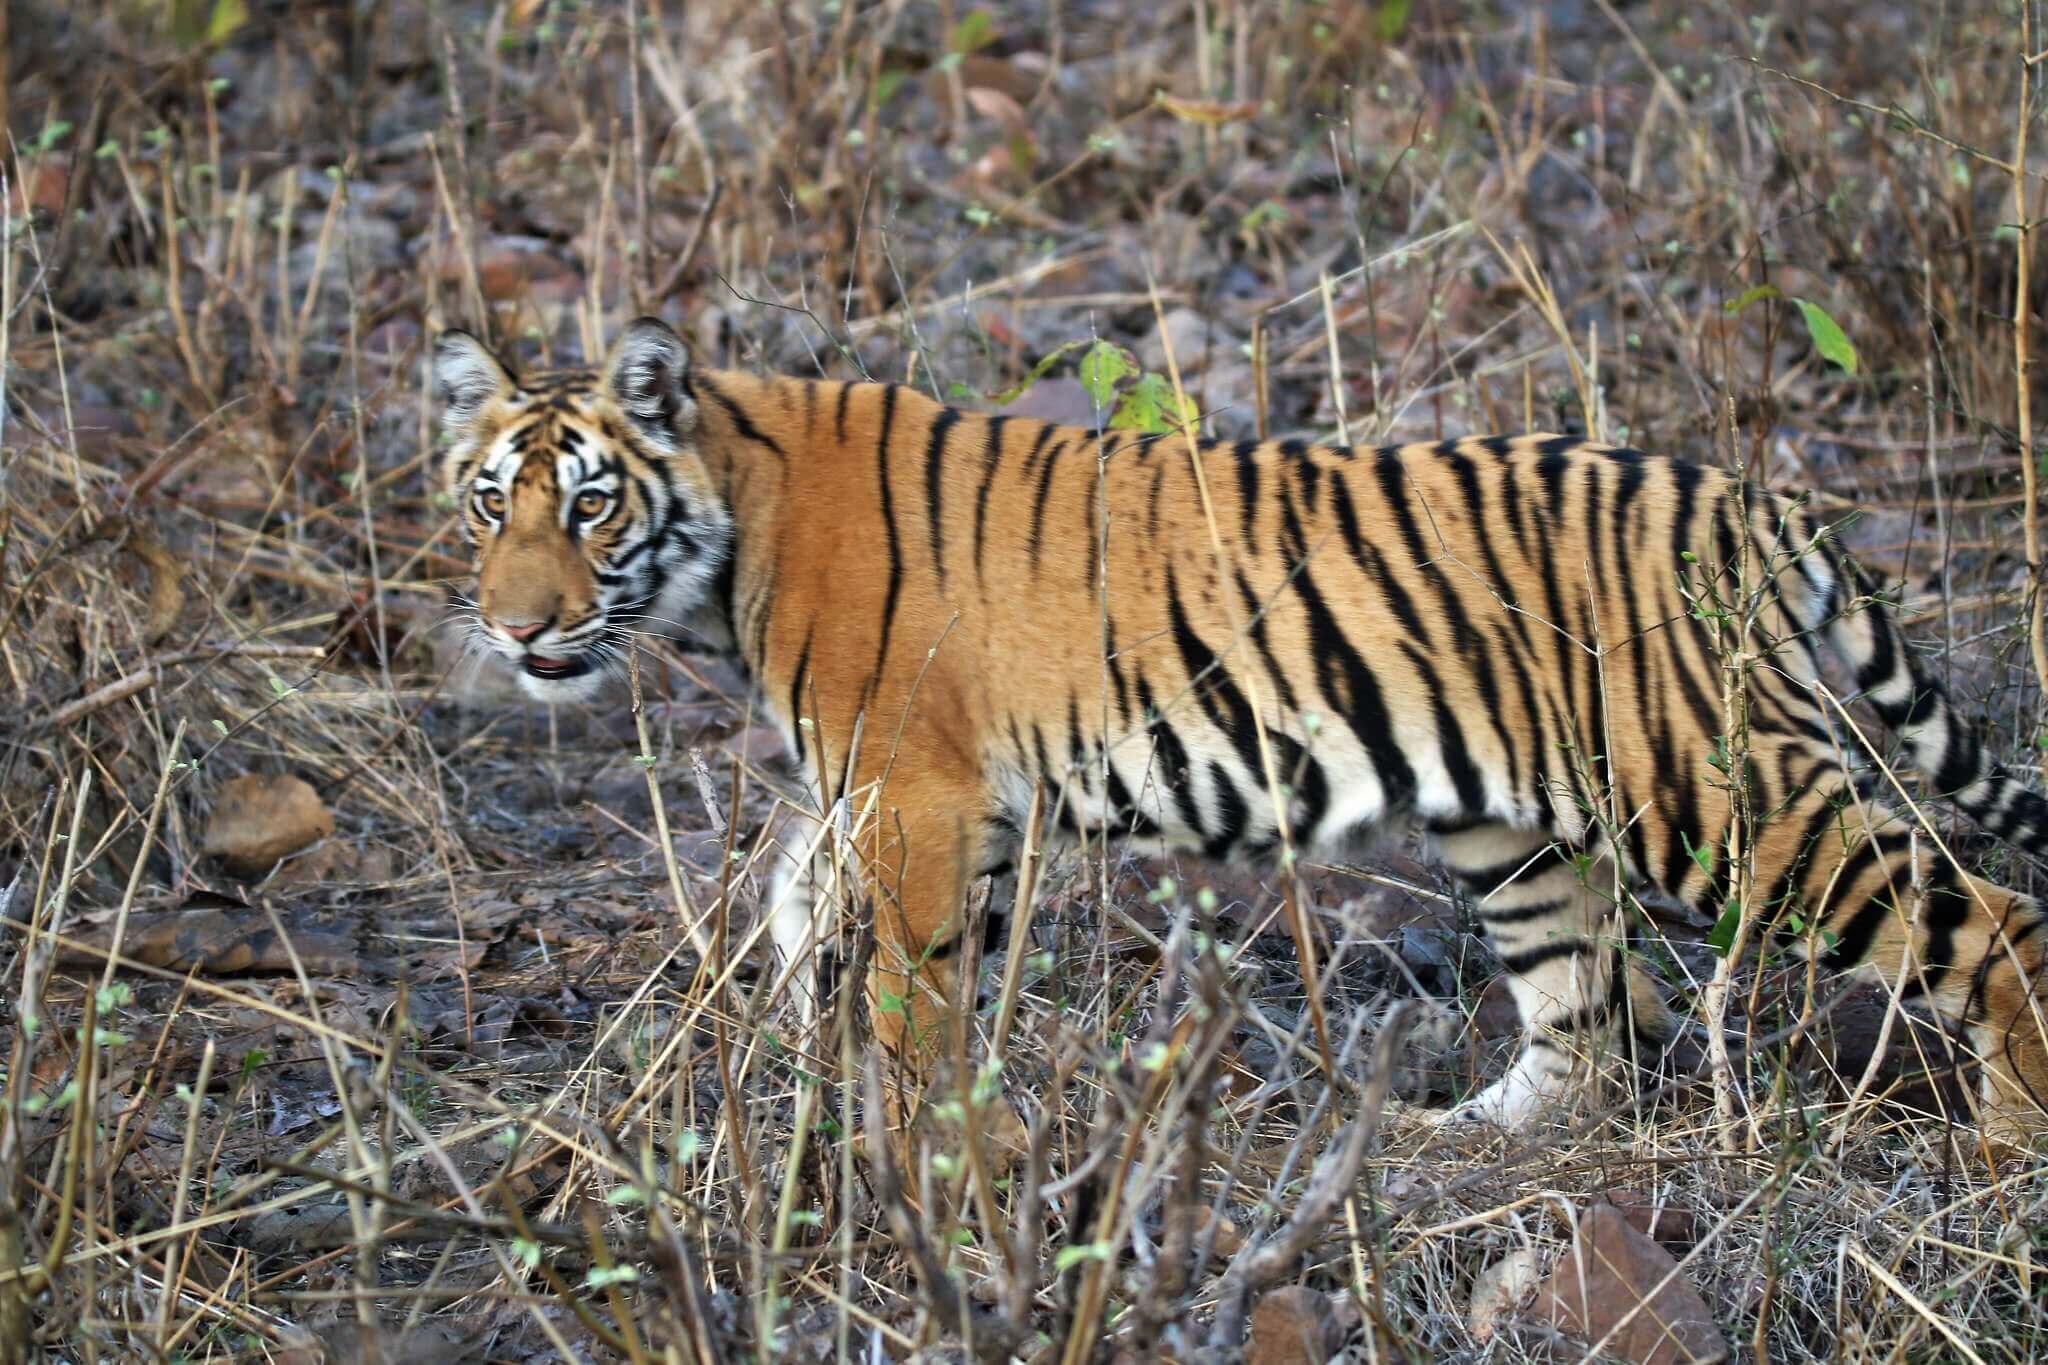 Majesty of the Royal Bengal Tiger